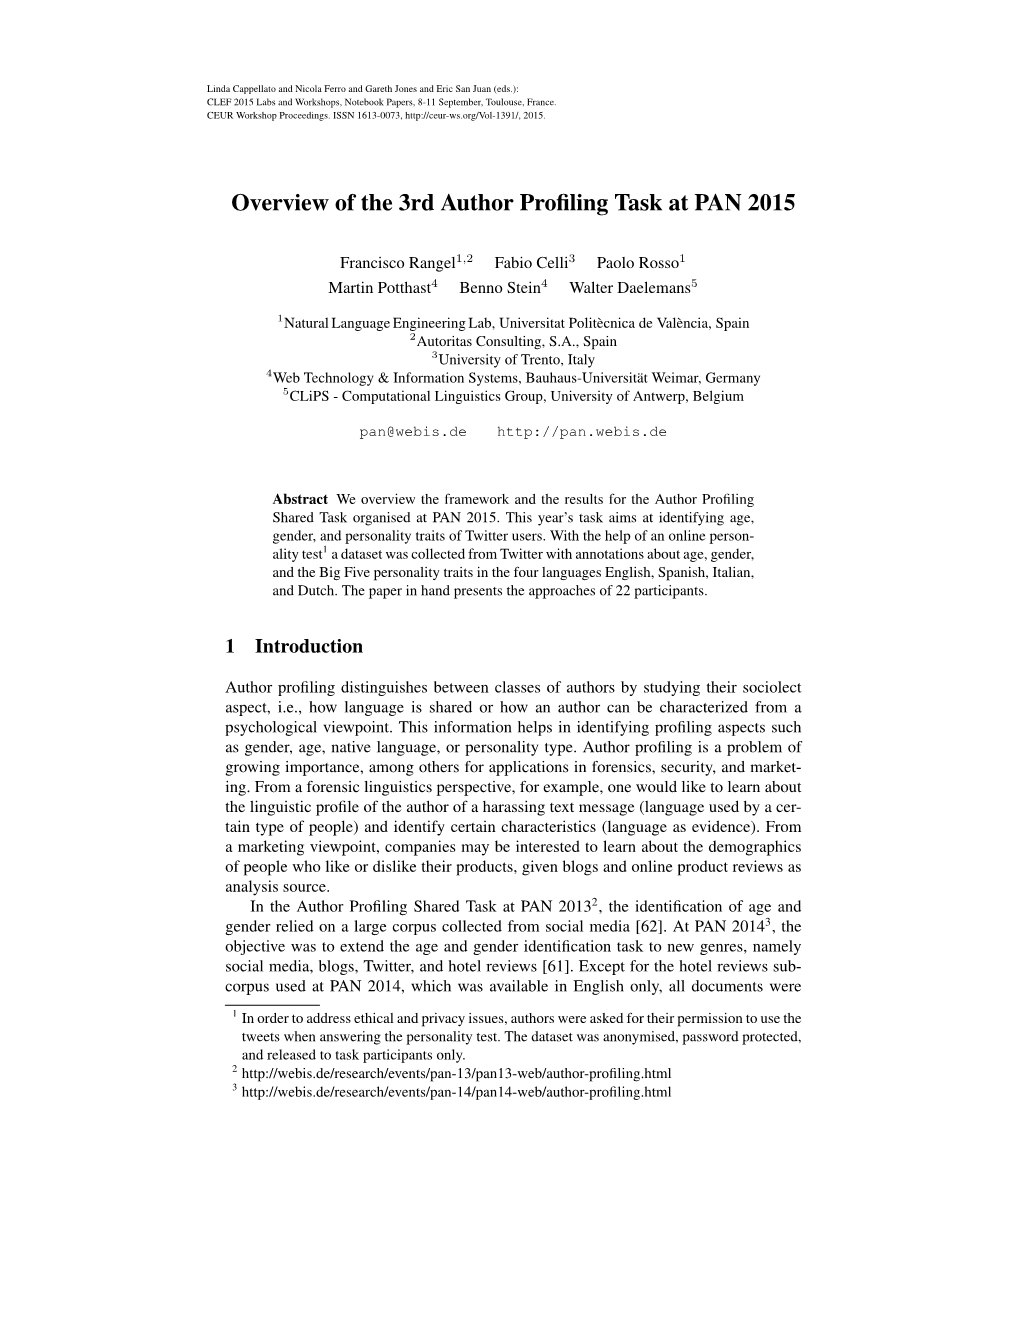 Overview of the 3Rd Author Profiling Task at PAN 2015